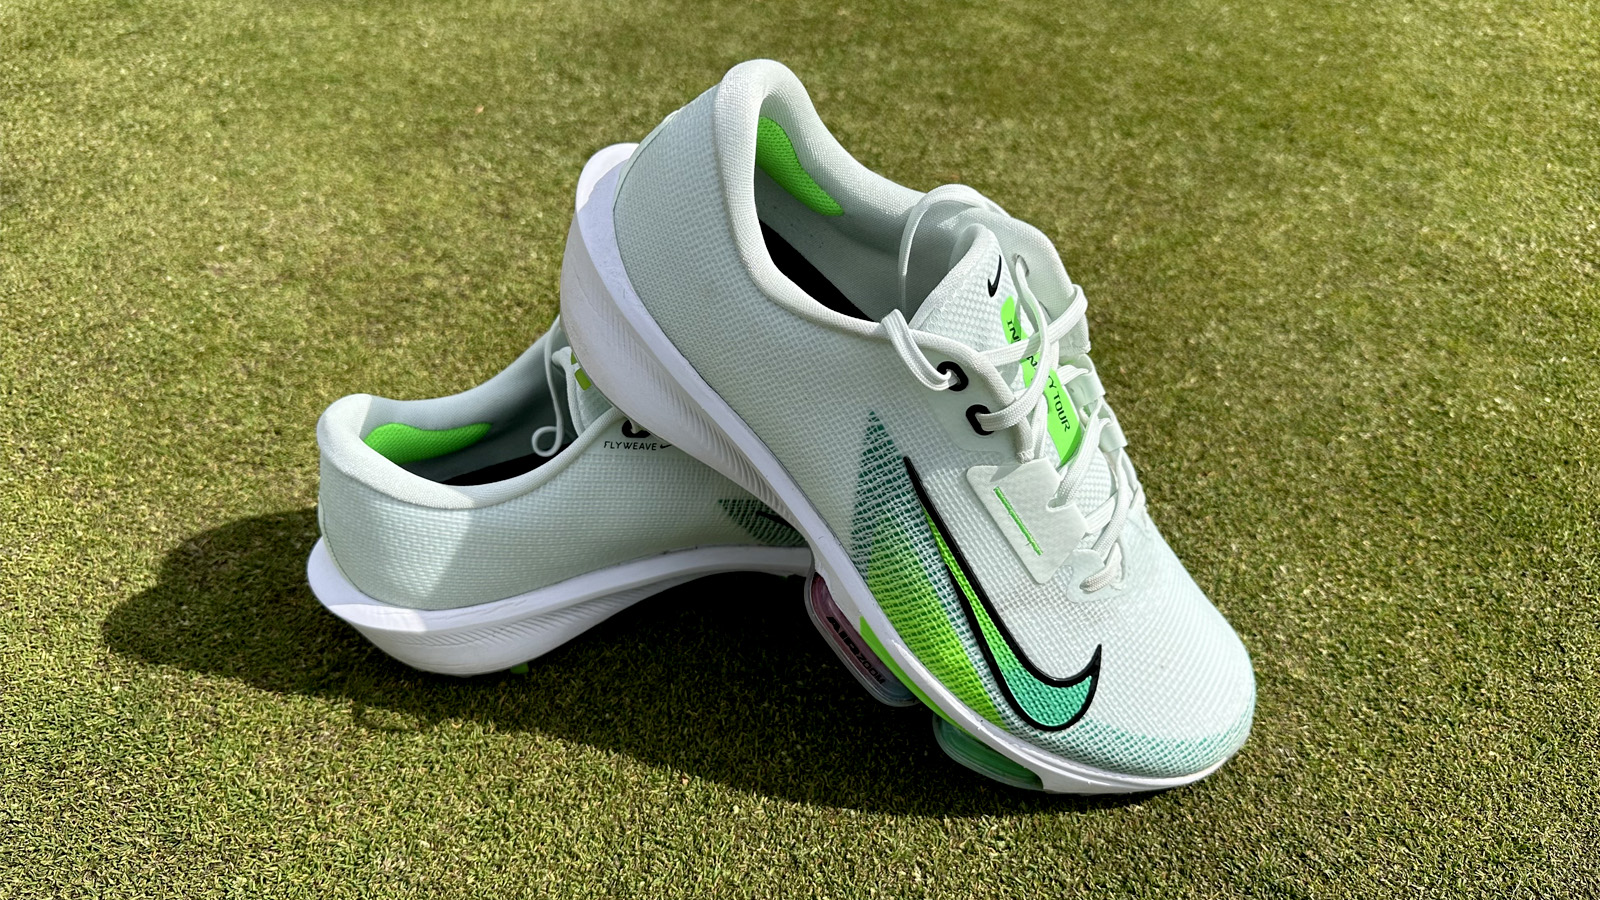 Nike Air Zoom Infinity Tour Next% 2 Golf Shoe Review | Golf Monthly